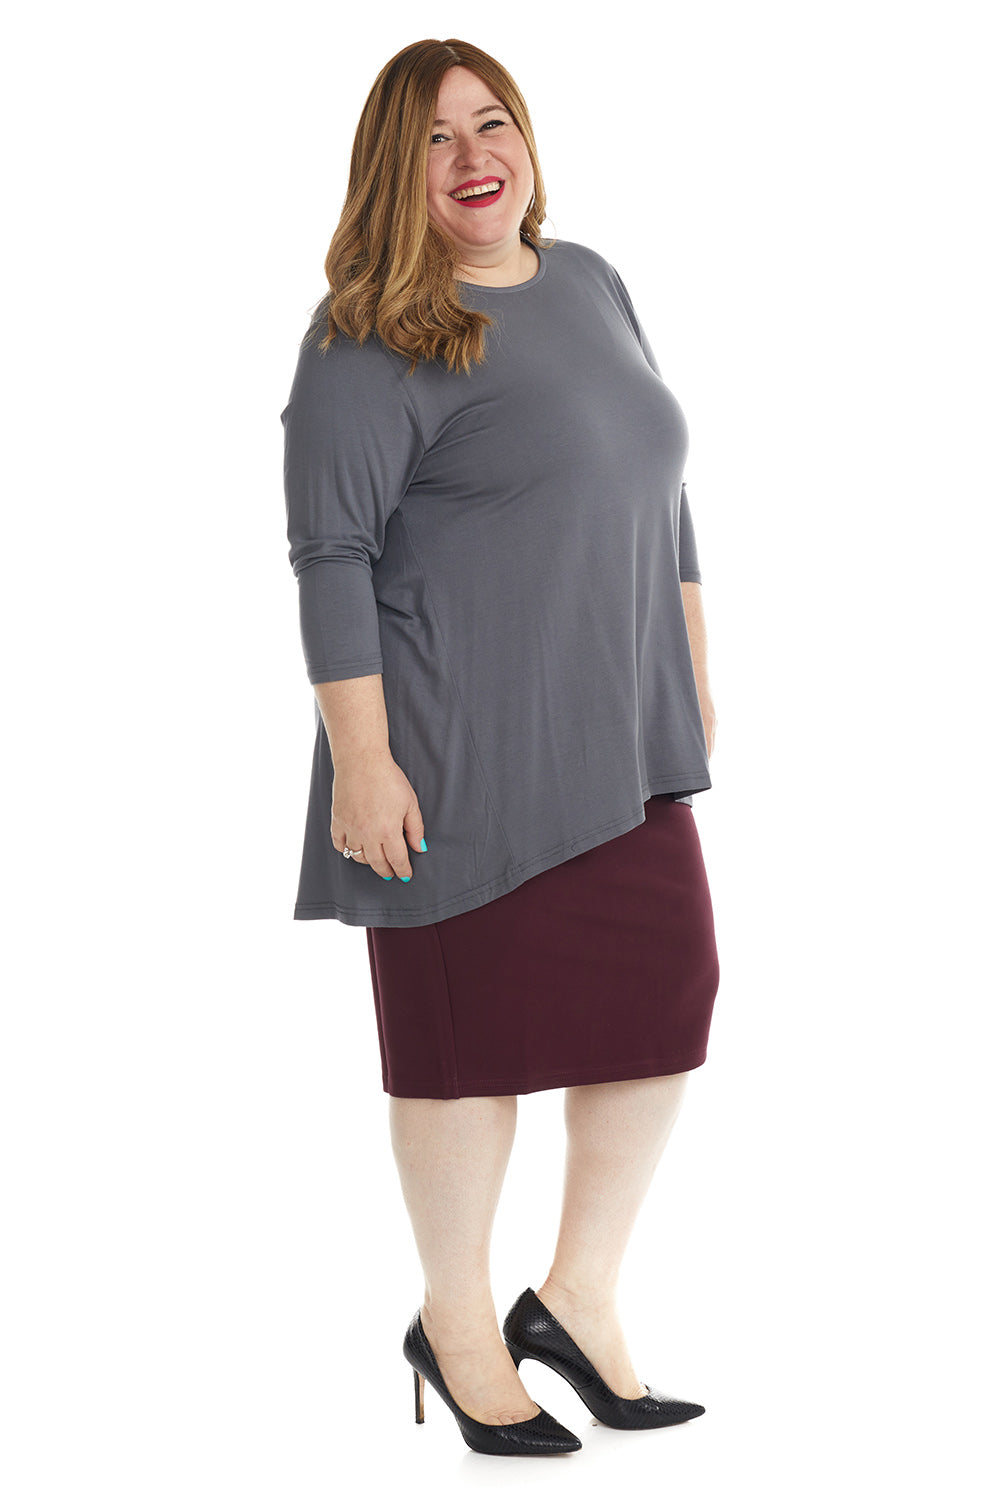 burgundy modest plus size below the knee pencil skirt without slit